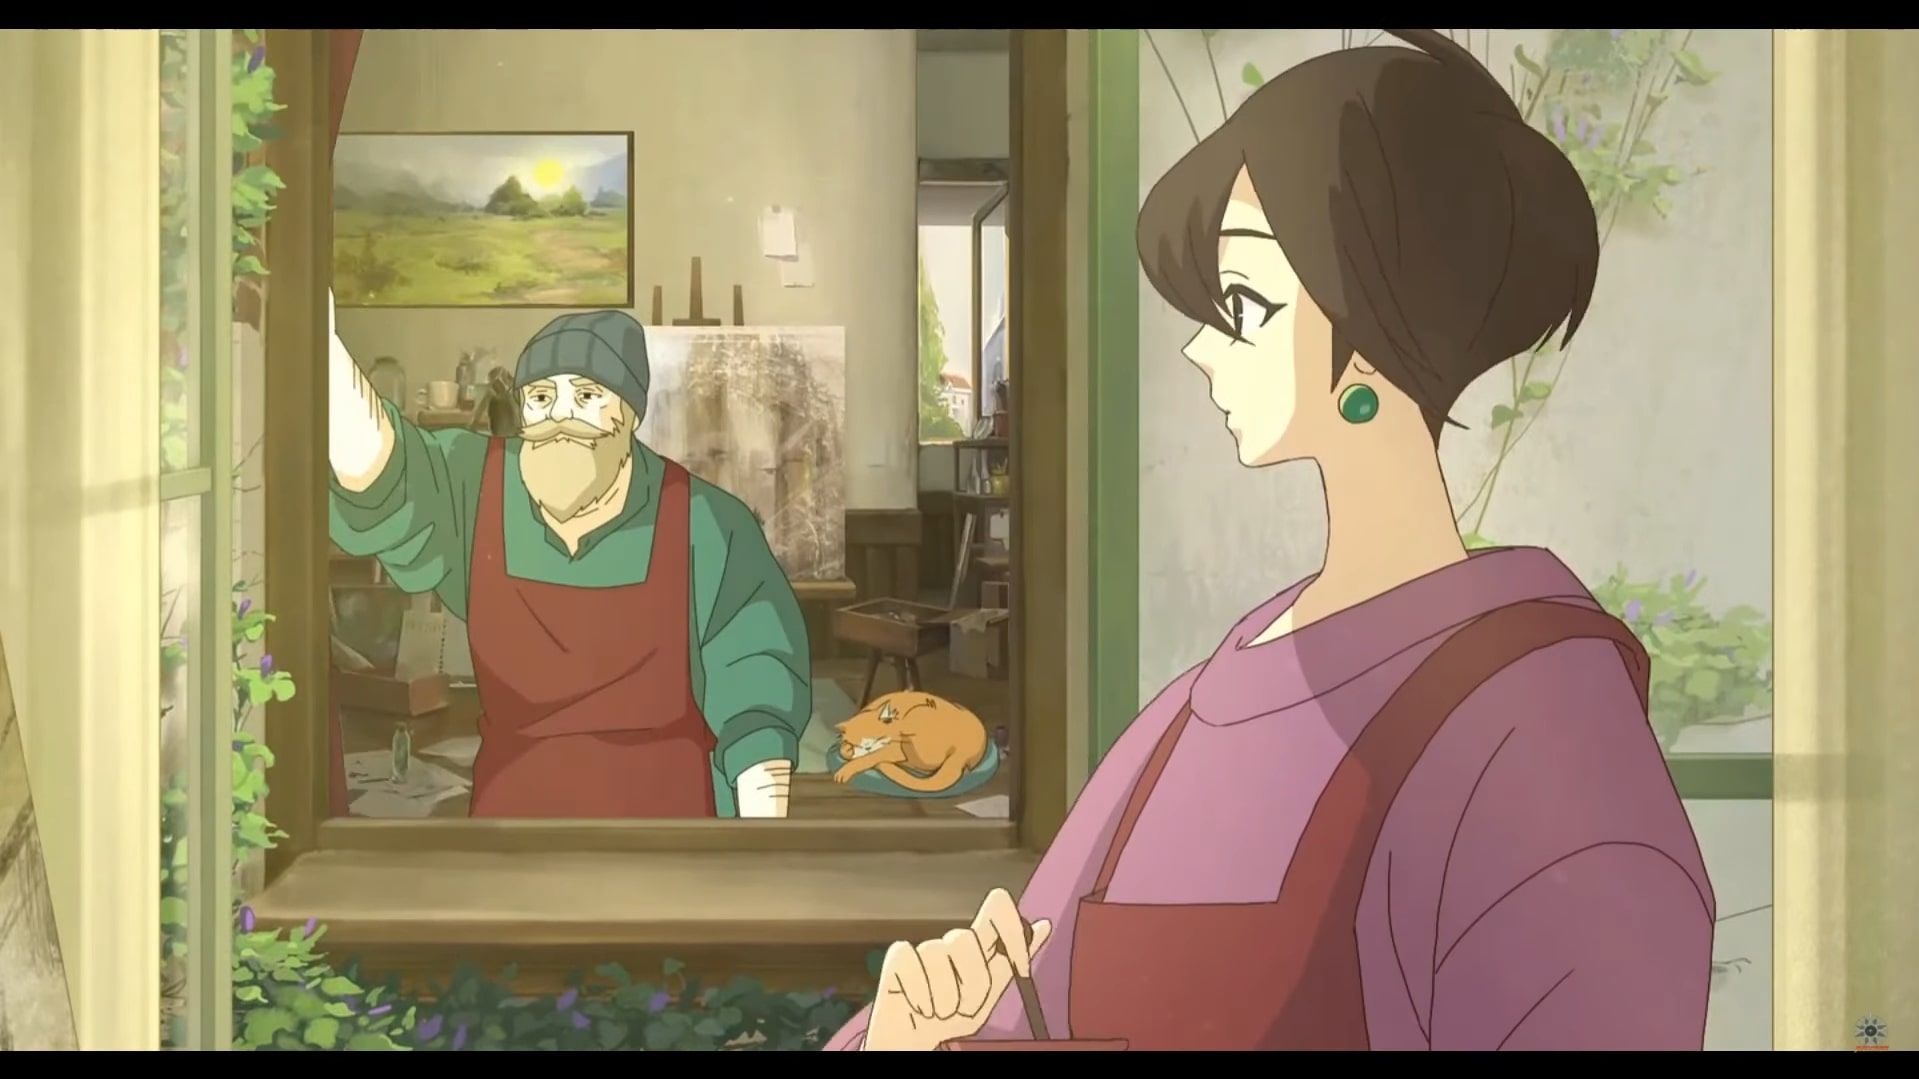  Behind the Frame is a Ghibli-inspired ode to painting that stole my heart 